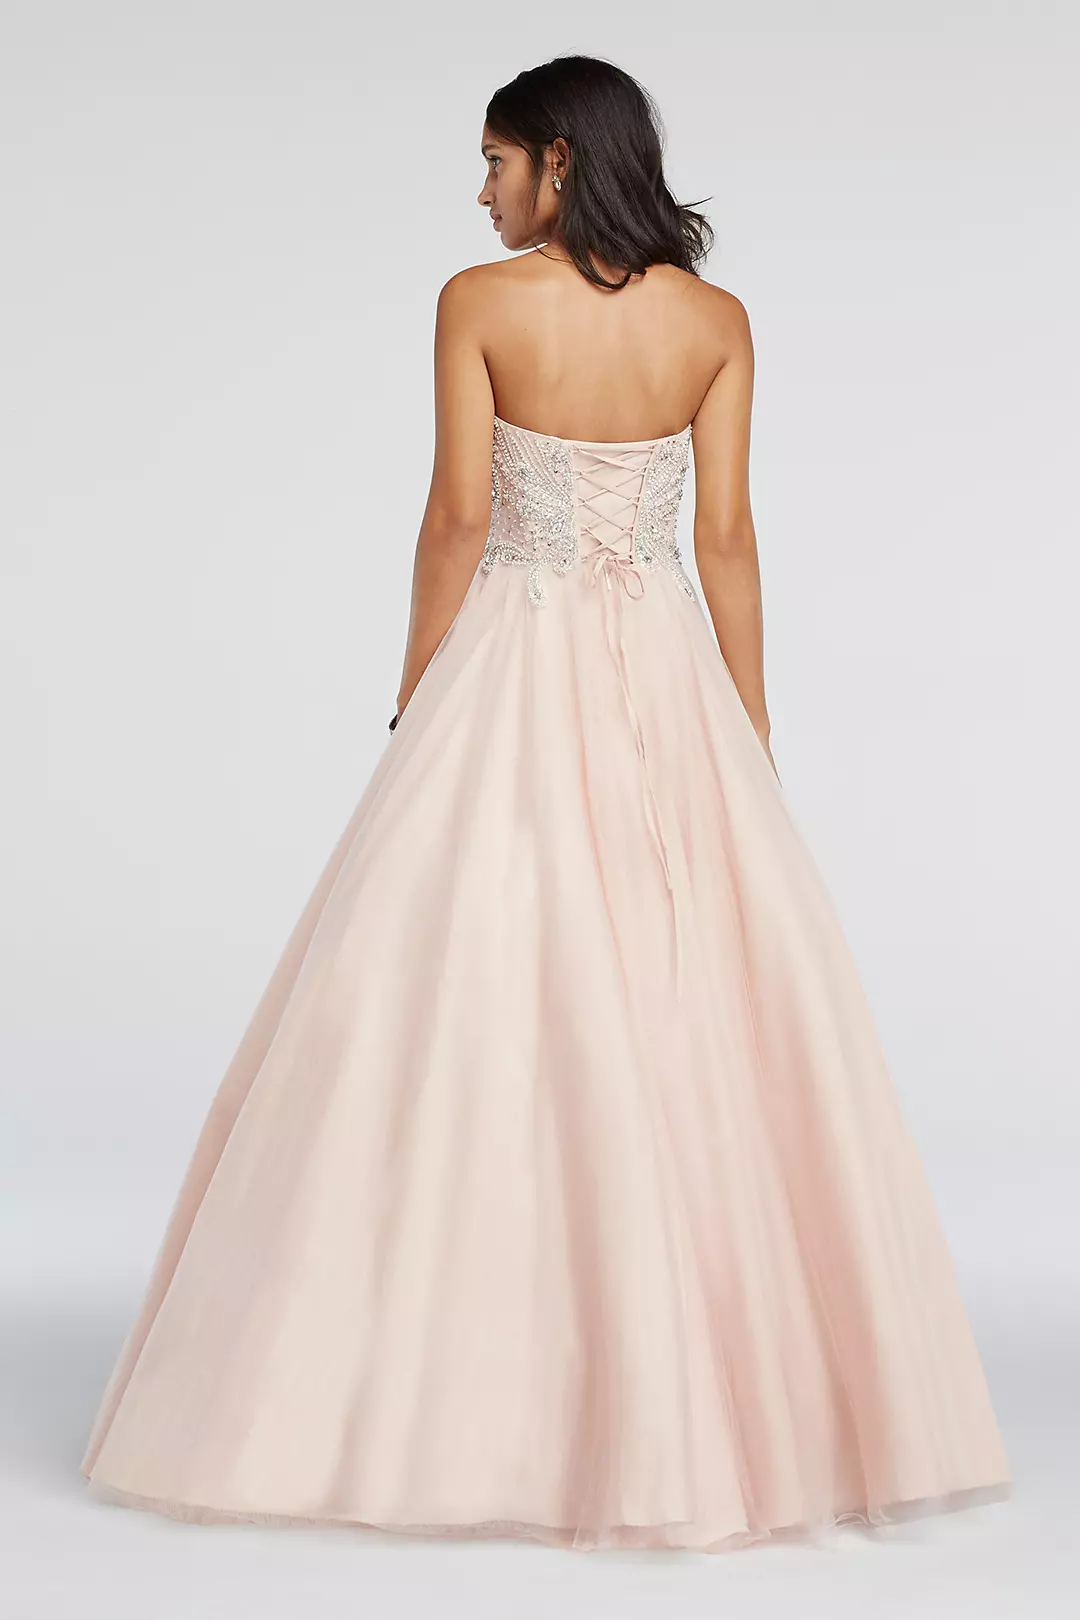 Crystal Beaded Strapless Sweetheart Prom Dress Image 2